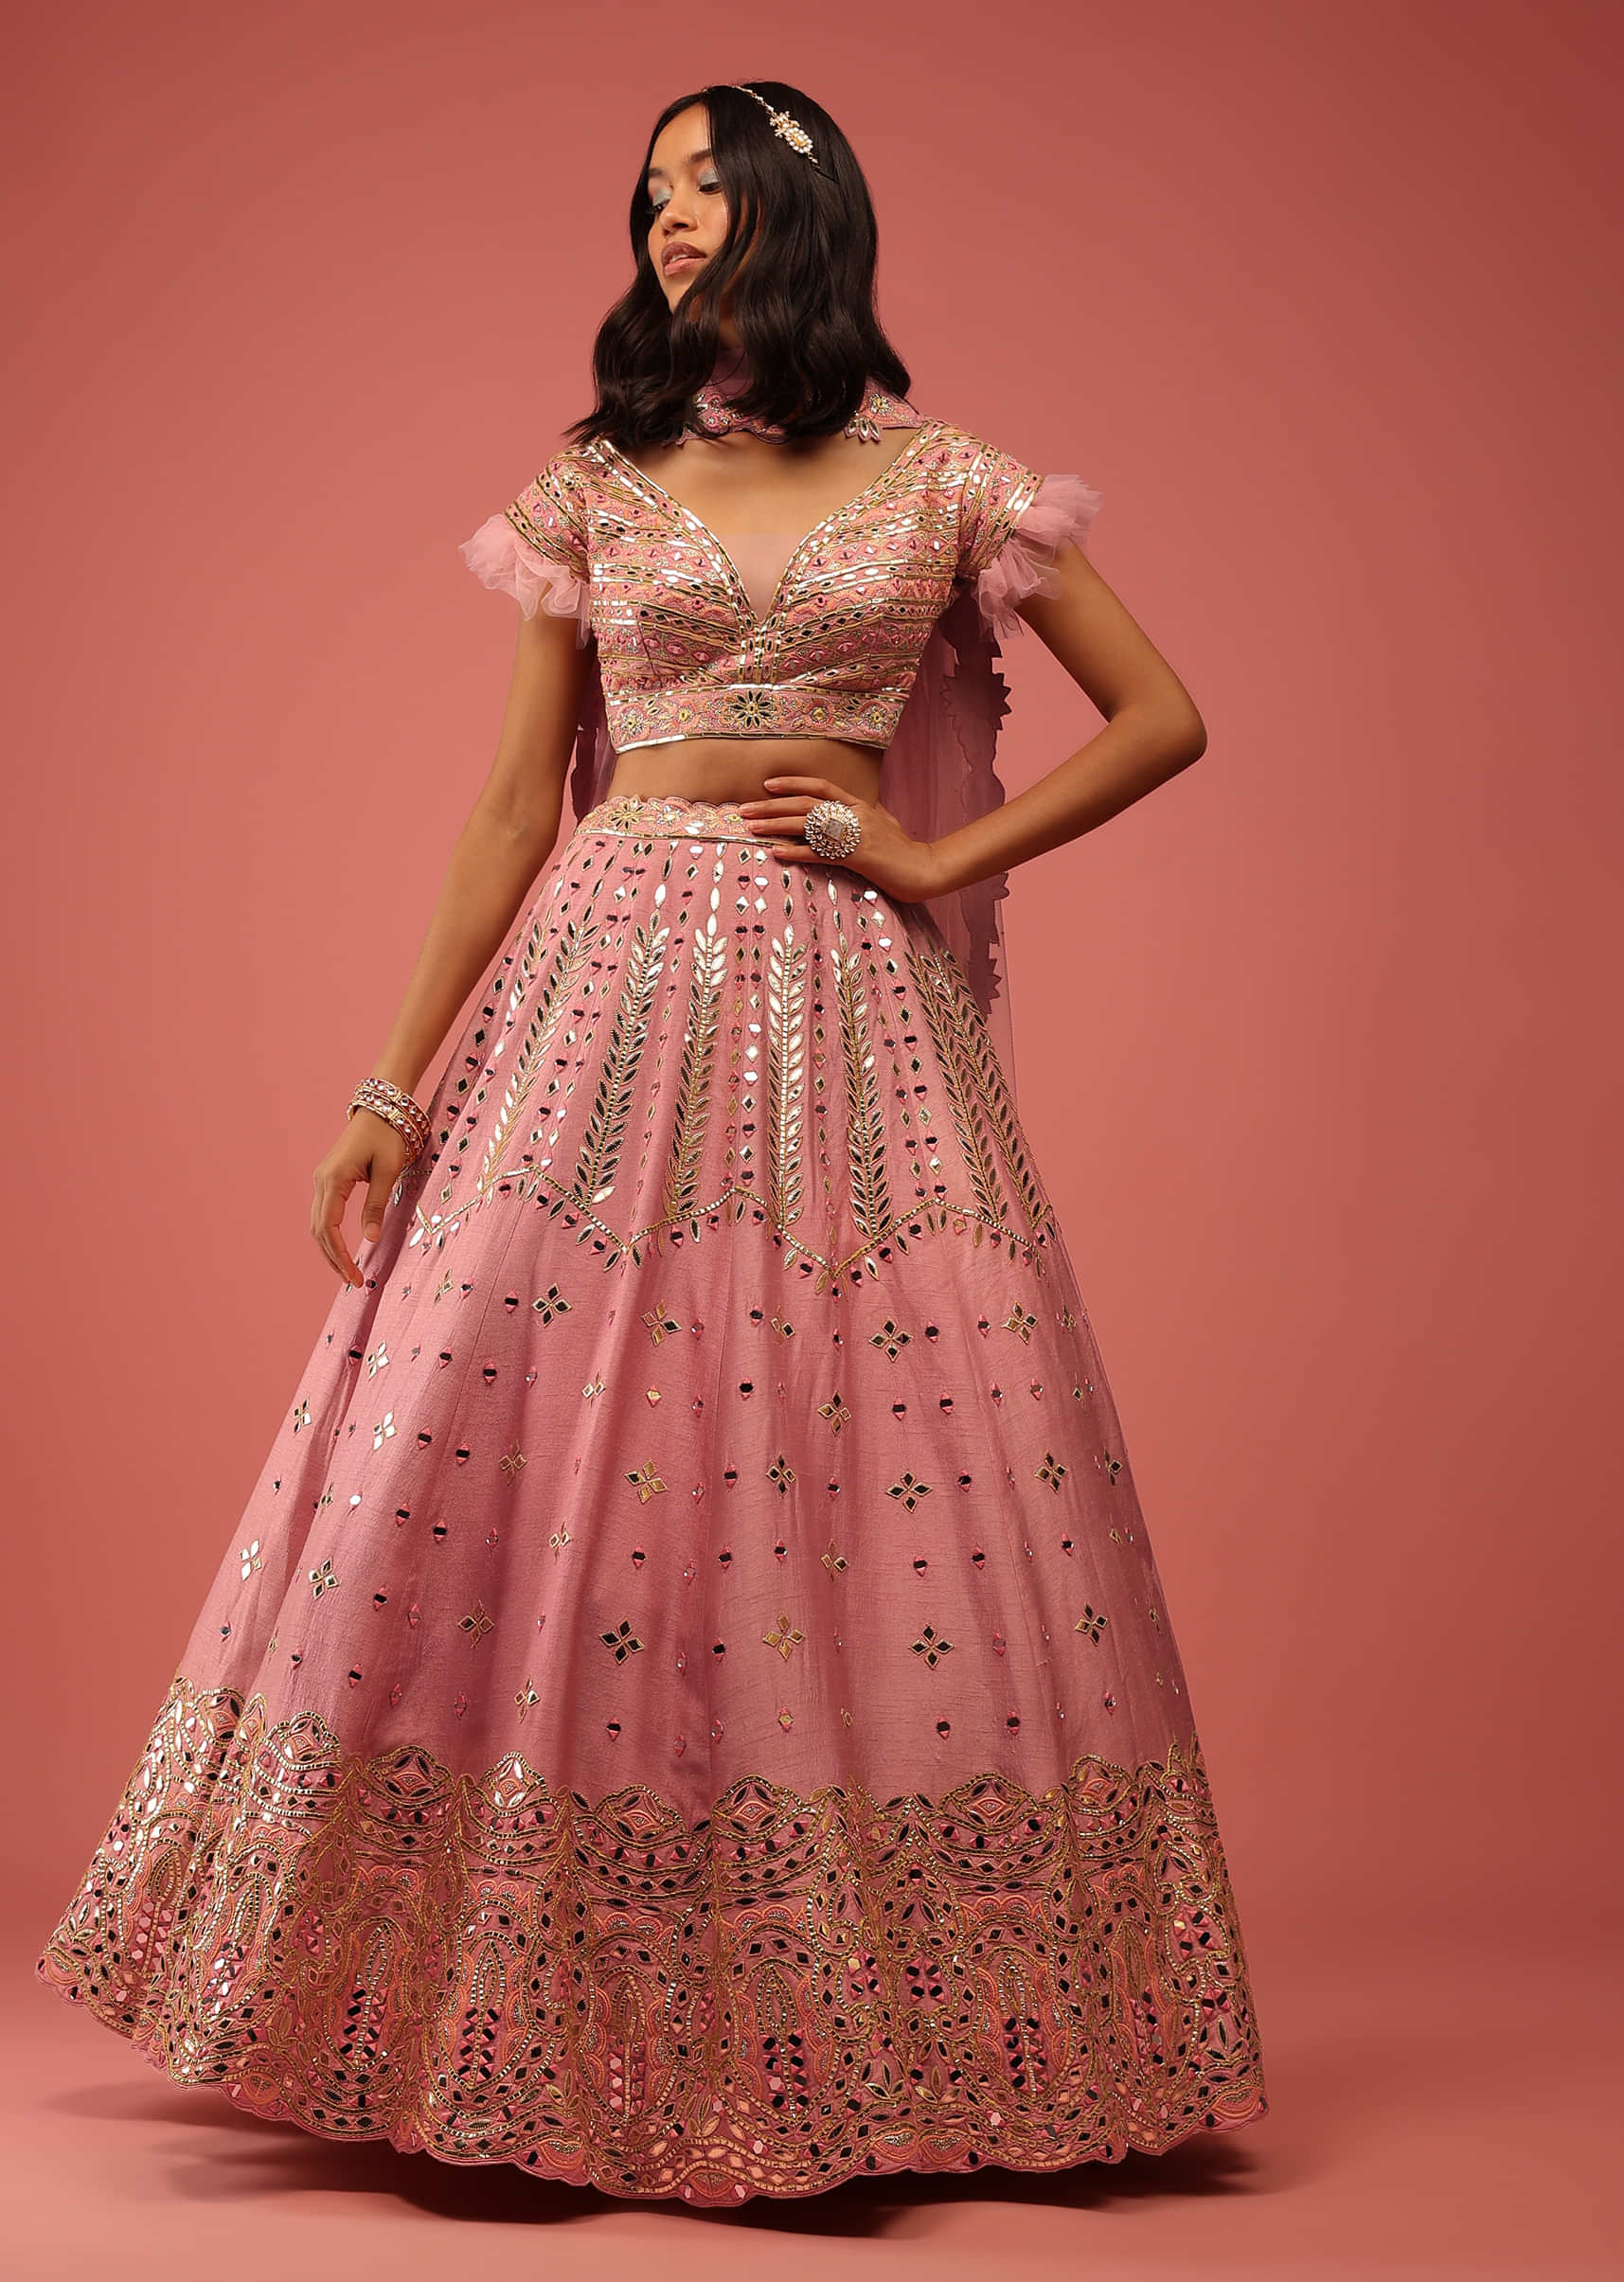 Rouge Pink Lehenga Choli In Raw Silk With Foil Applique And Ruffle Sleeves